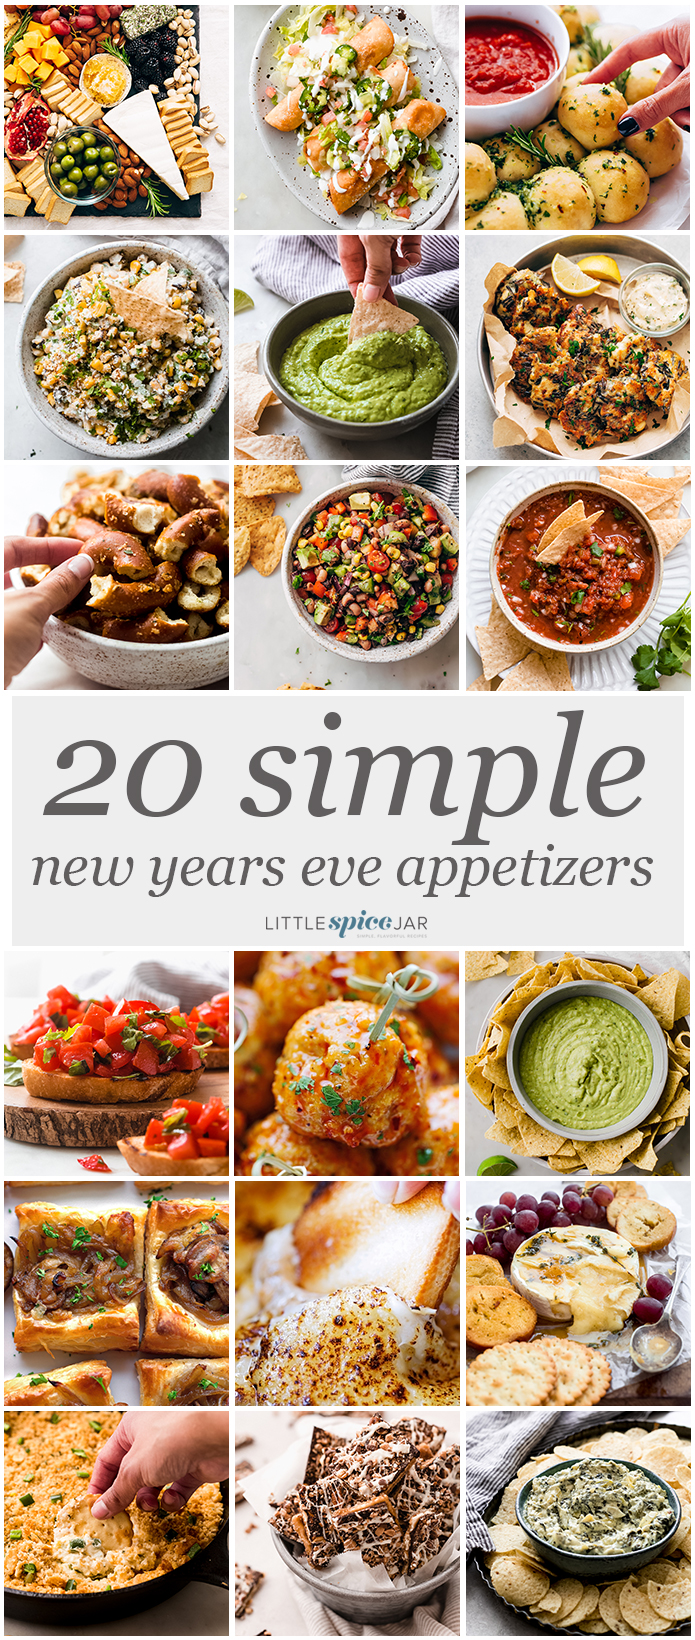 20 NYE appetizers you absolutely have to try! Most of them can be made ahead of time and/or take around 10 minutes to make! #appetizers #newyearsappetizers #holidayfood #dips #diprecipes #footballfood | Littlespicejar.com